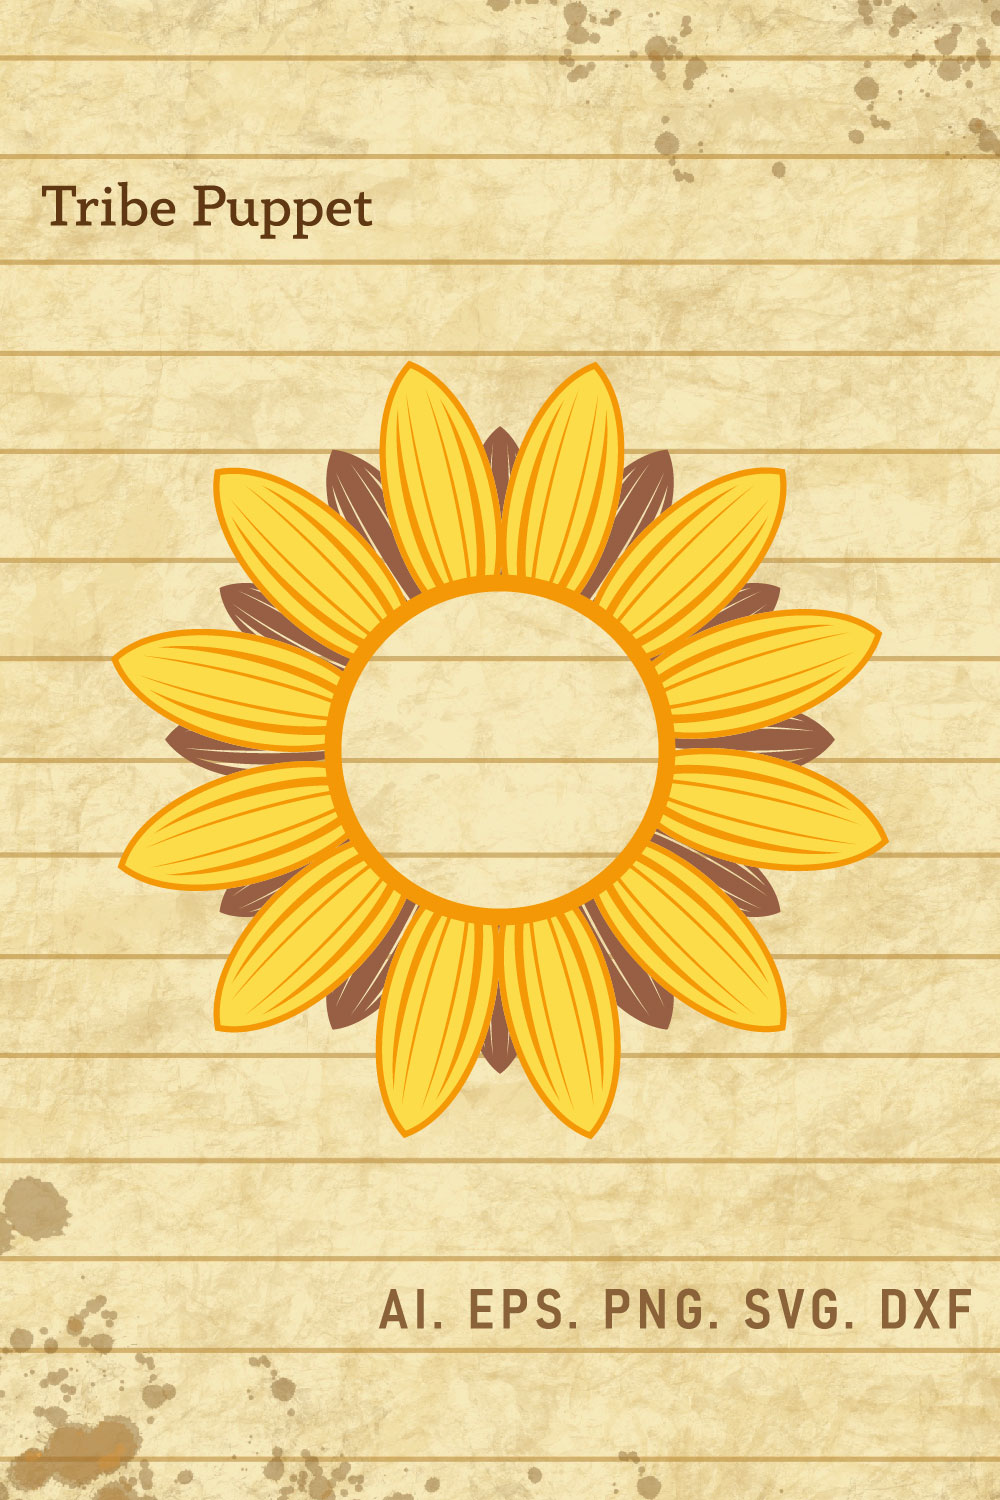 Sunflower 15 pinterest preview image.